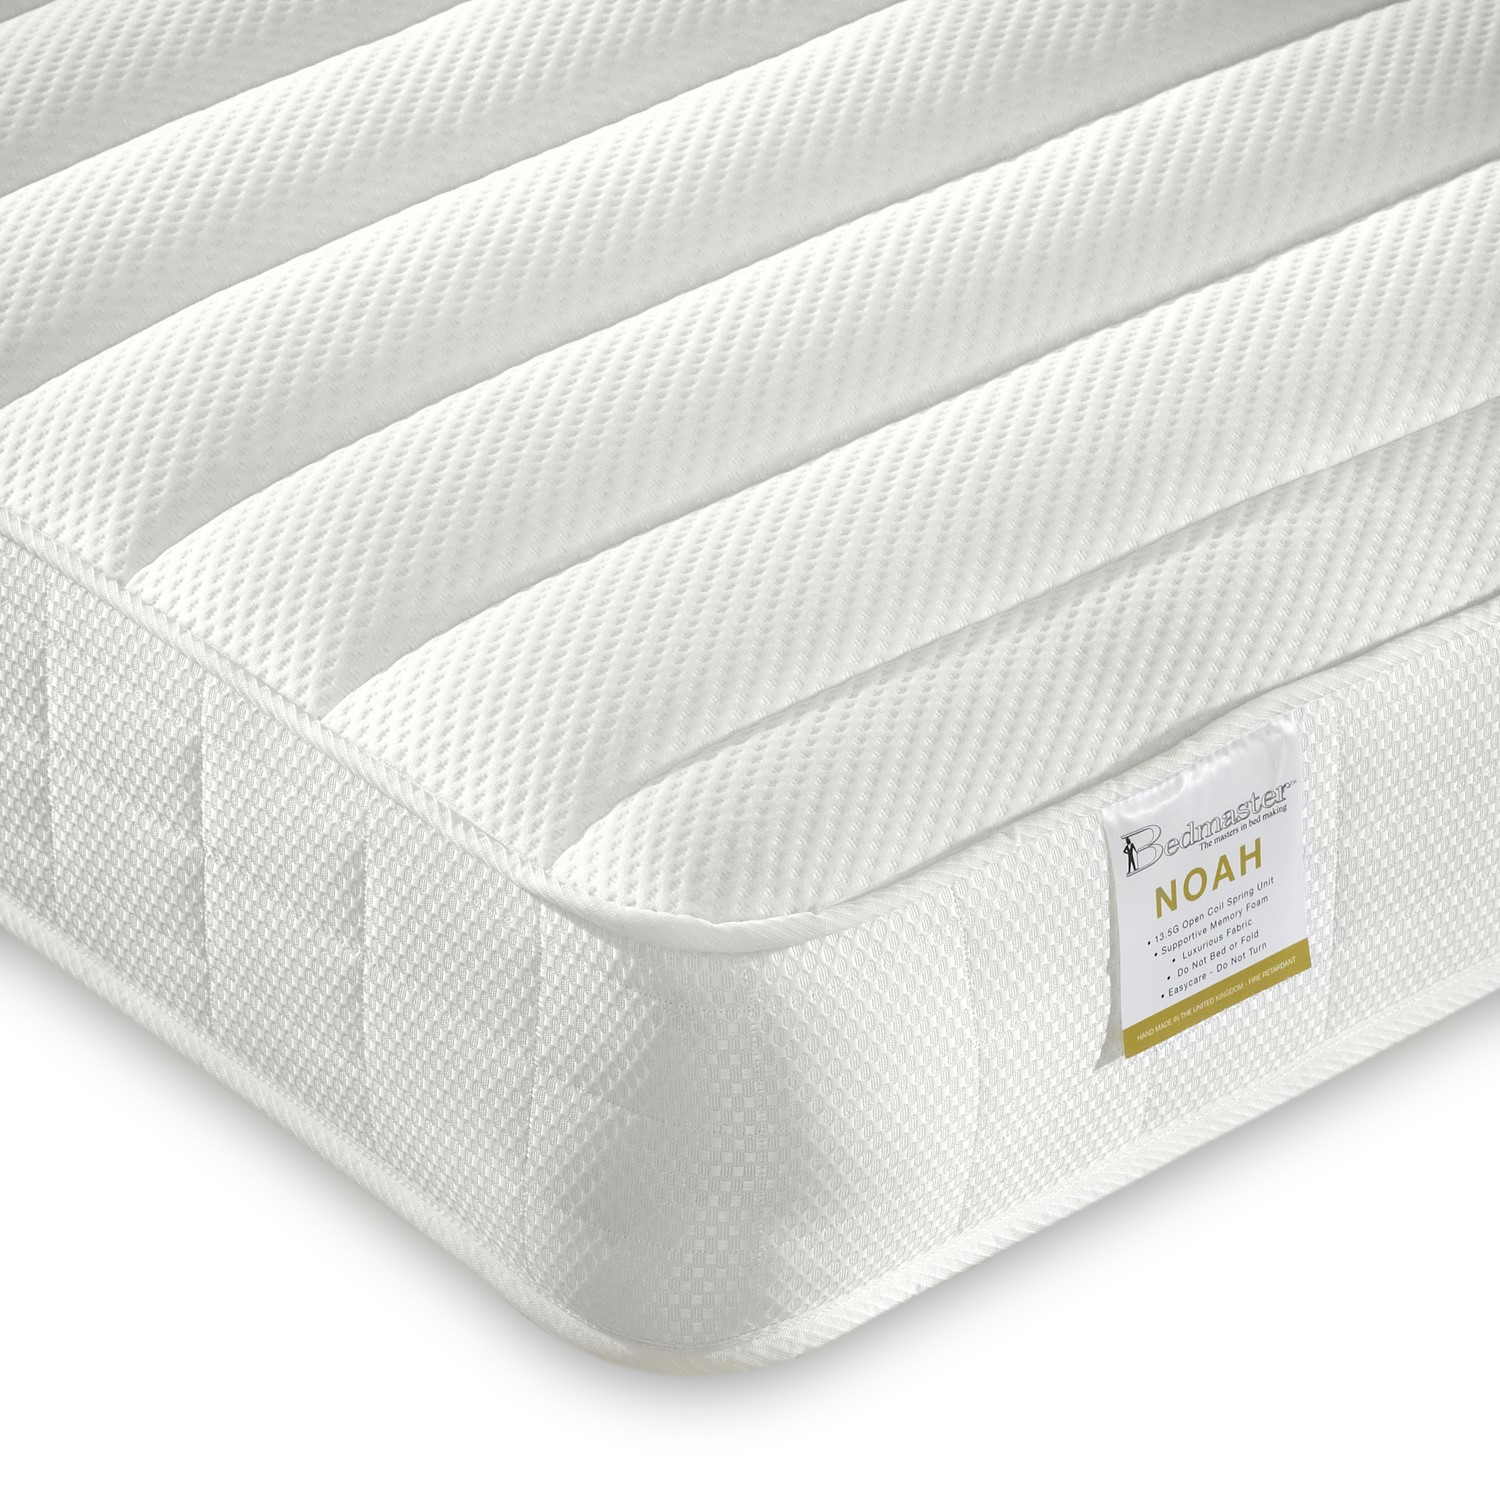 Noah hybrid memory foam and coil spring quilted mattress - small single